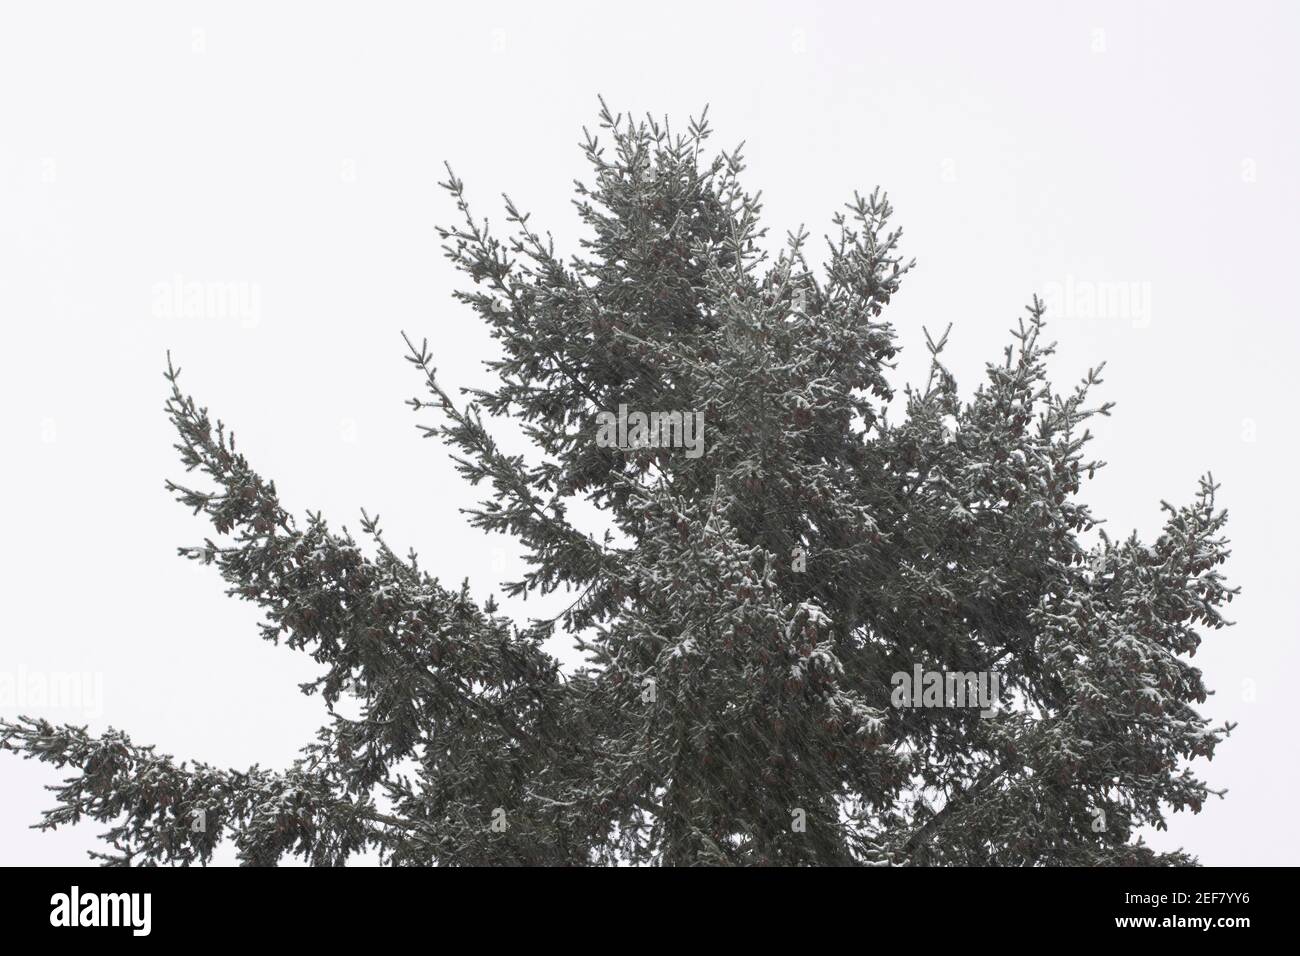 Douglas fir tree on a snowy day. The tree is native to western North America and is also known as Douglas spruce, Oregon pine, and Columbian pine. Stock Photo